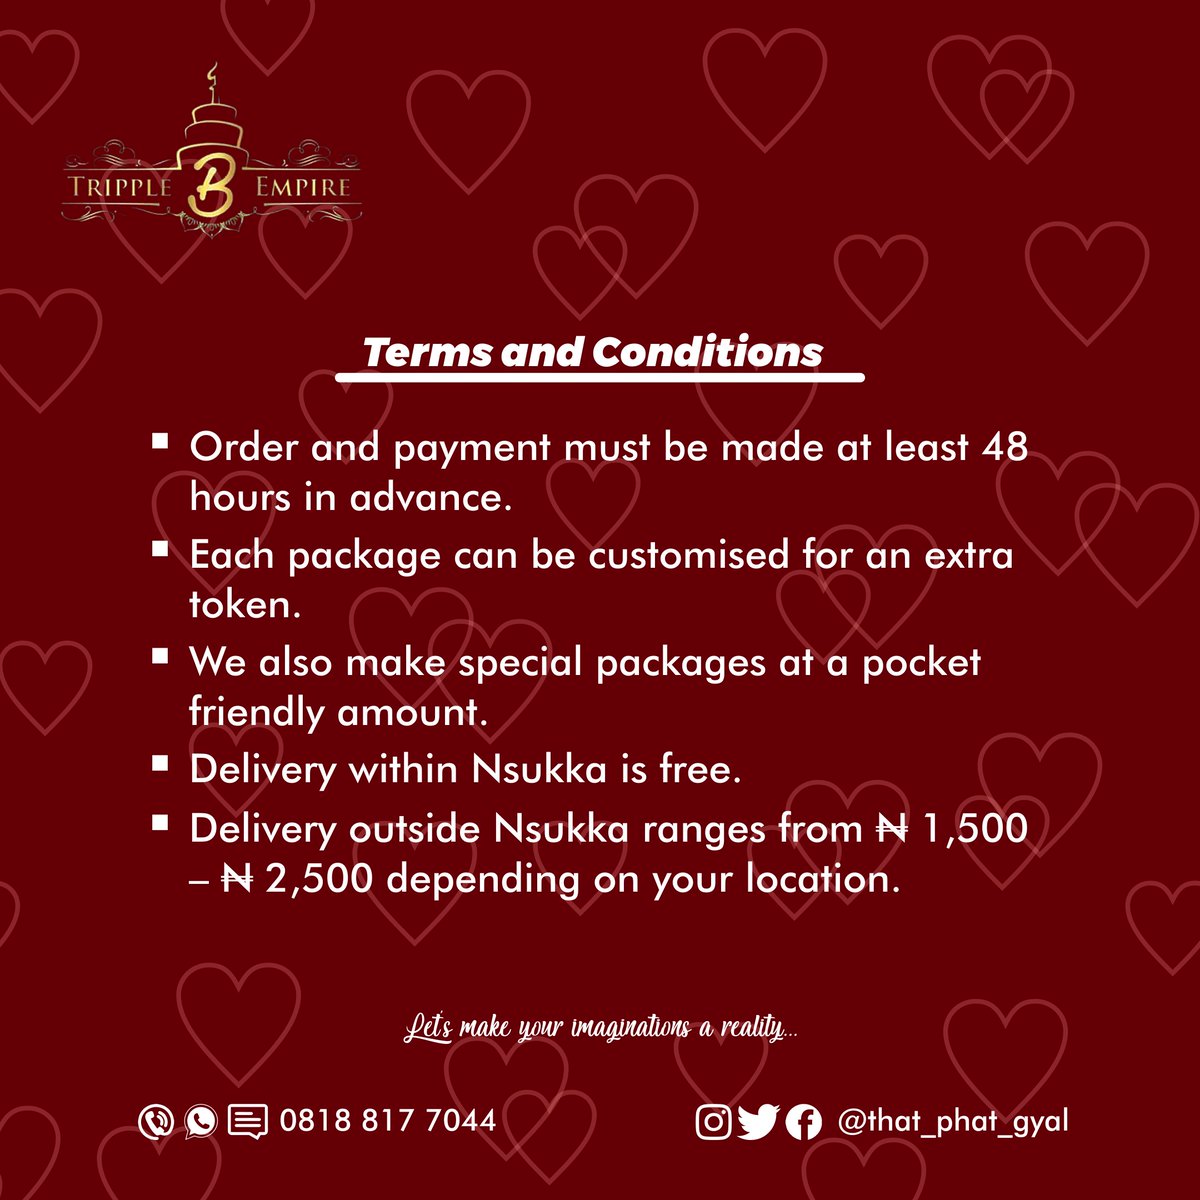 Wondering want to give to that special someone? Well we've got you covered with our valentine packages specially created for you with love. Swipe to view our packages.👉👉There is something for everyone my darlings.😍
#ValentinesDay 
#valentinesgift 
#ValentineSpecial
#Enugubaker